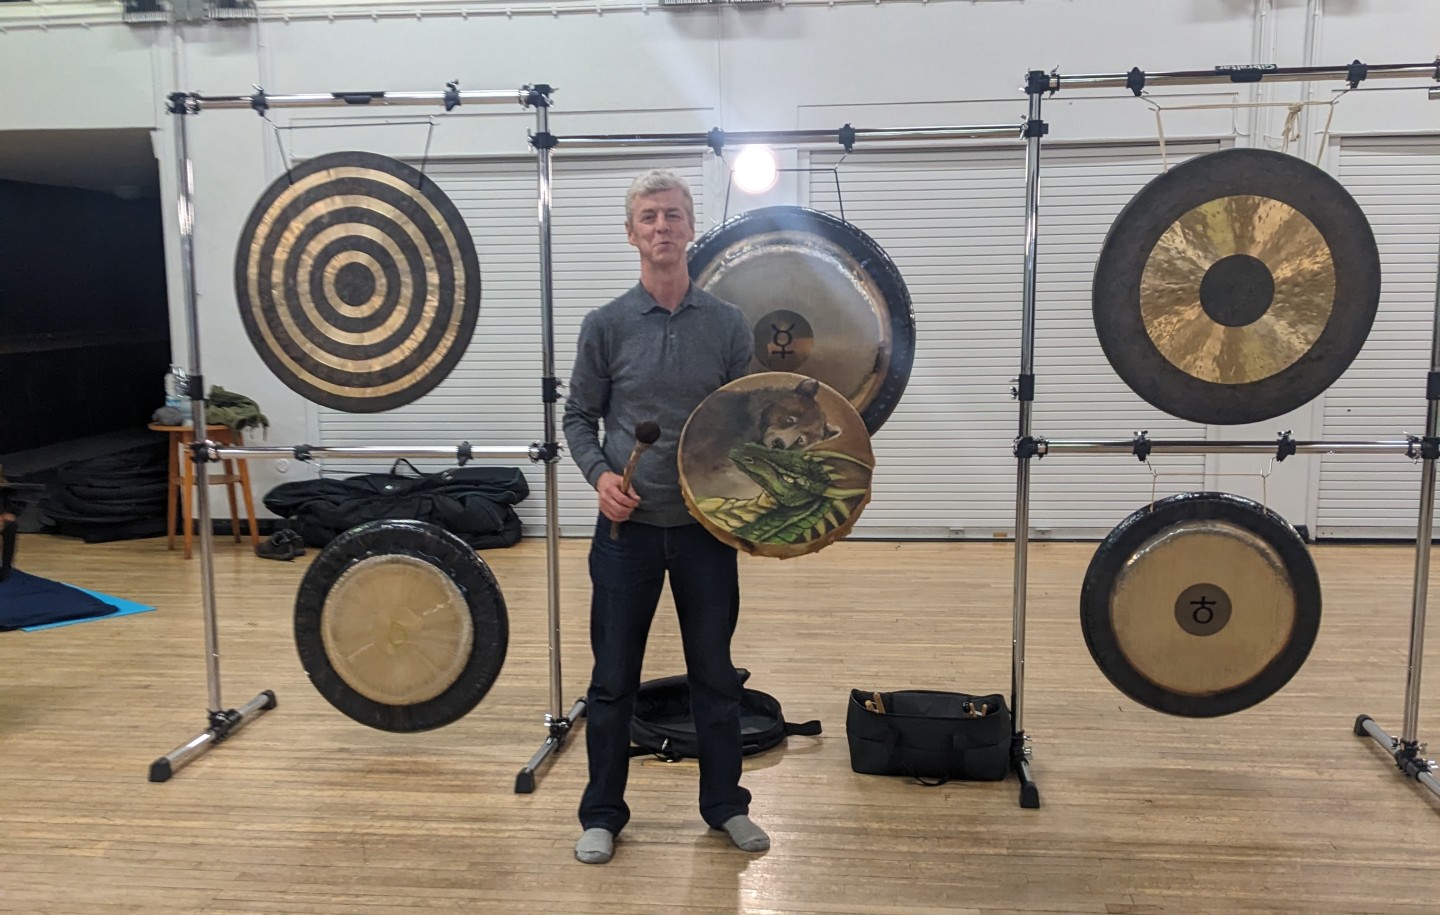 Gong bath at the Monastery Manchester